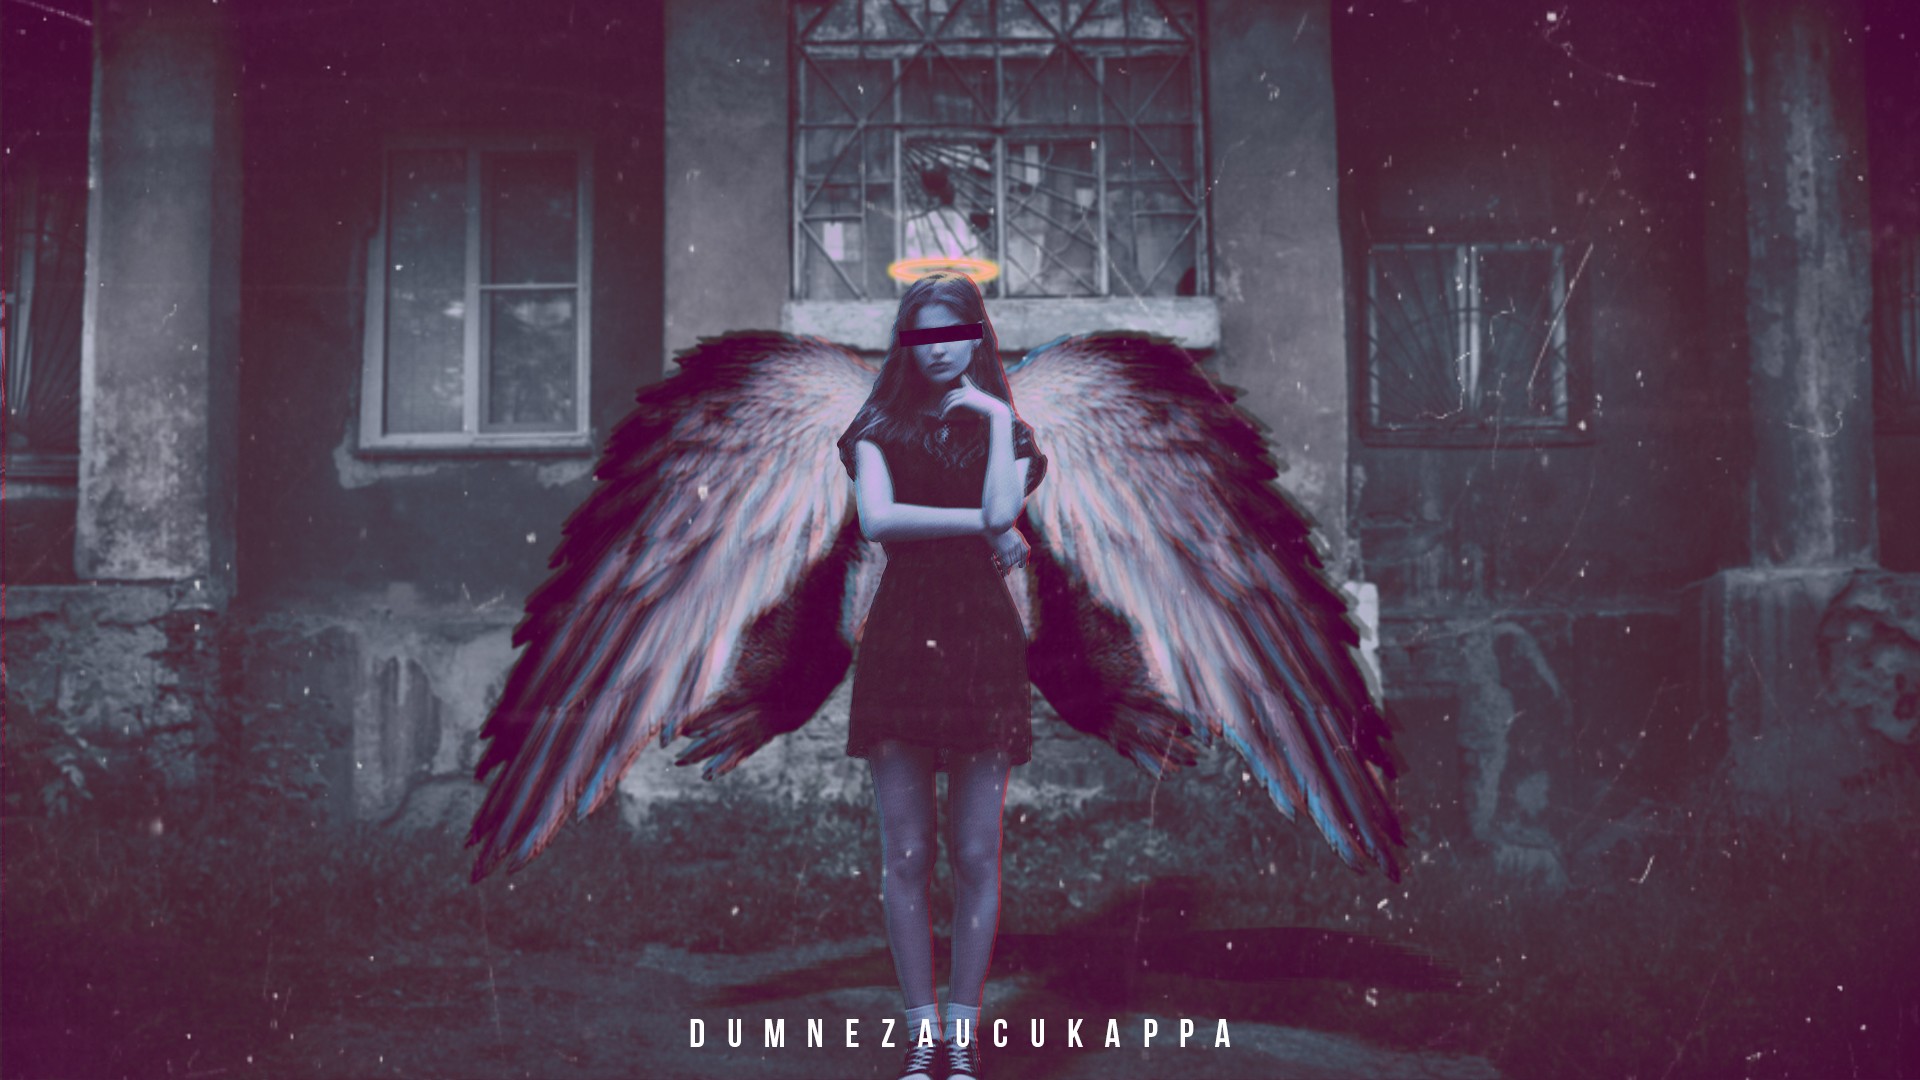 Women, Photoshopped, Abstract, Angel, Wings, Censored 